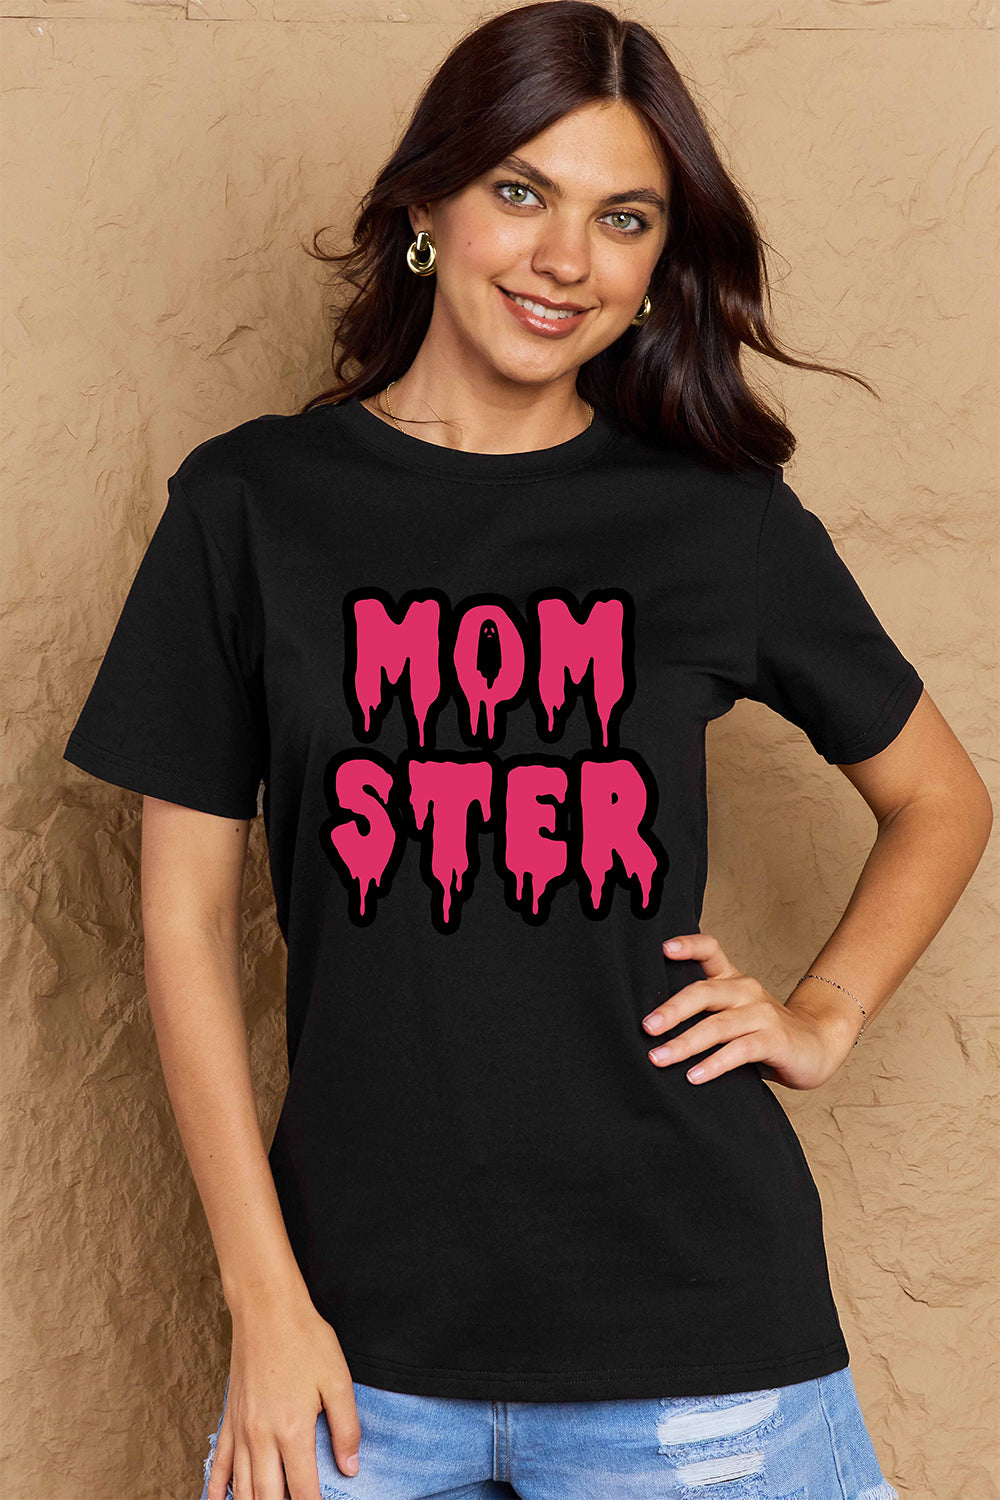 Full Size MOM STER Graphic Cotton T-Shirt